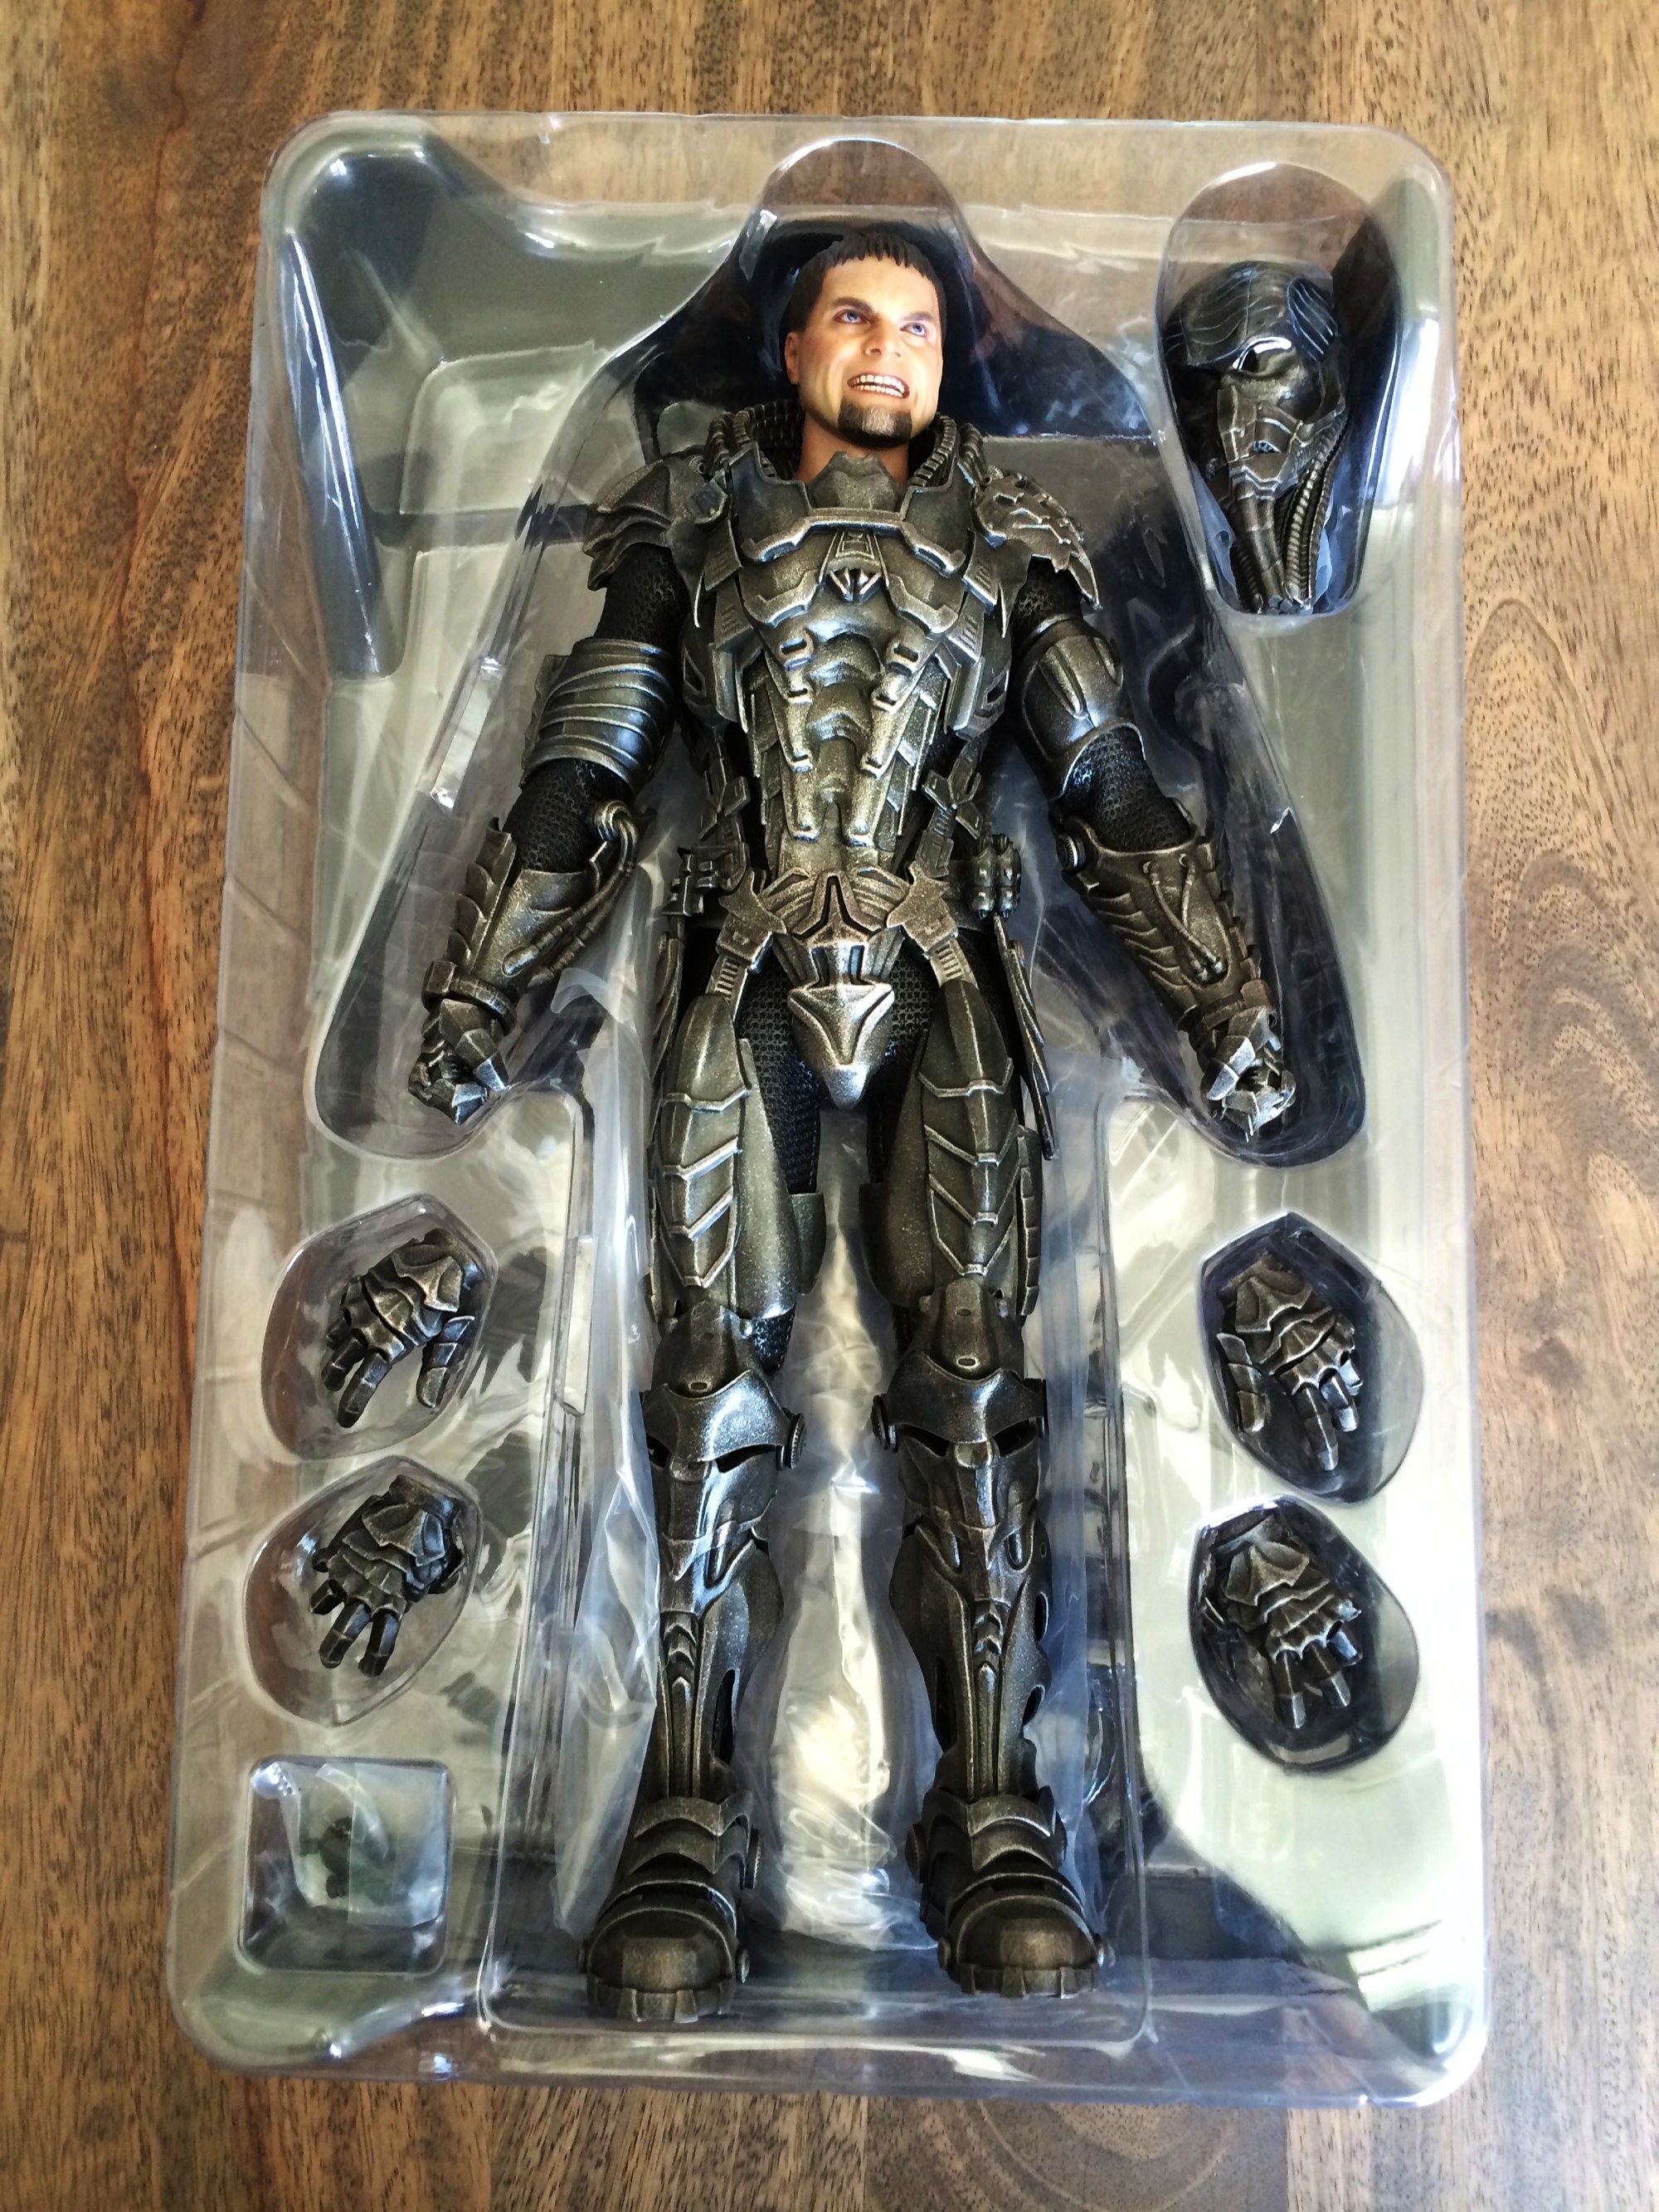 Cool Stuff: Hot Toys 'Man Of Steel' General Zod Sixth Scale Figure